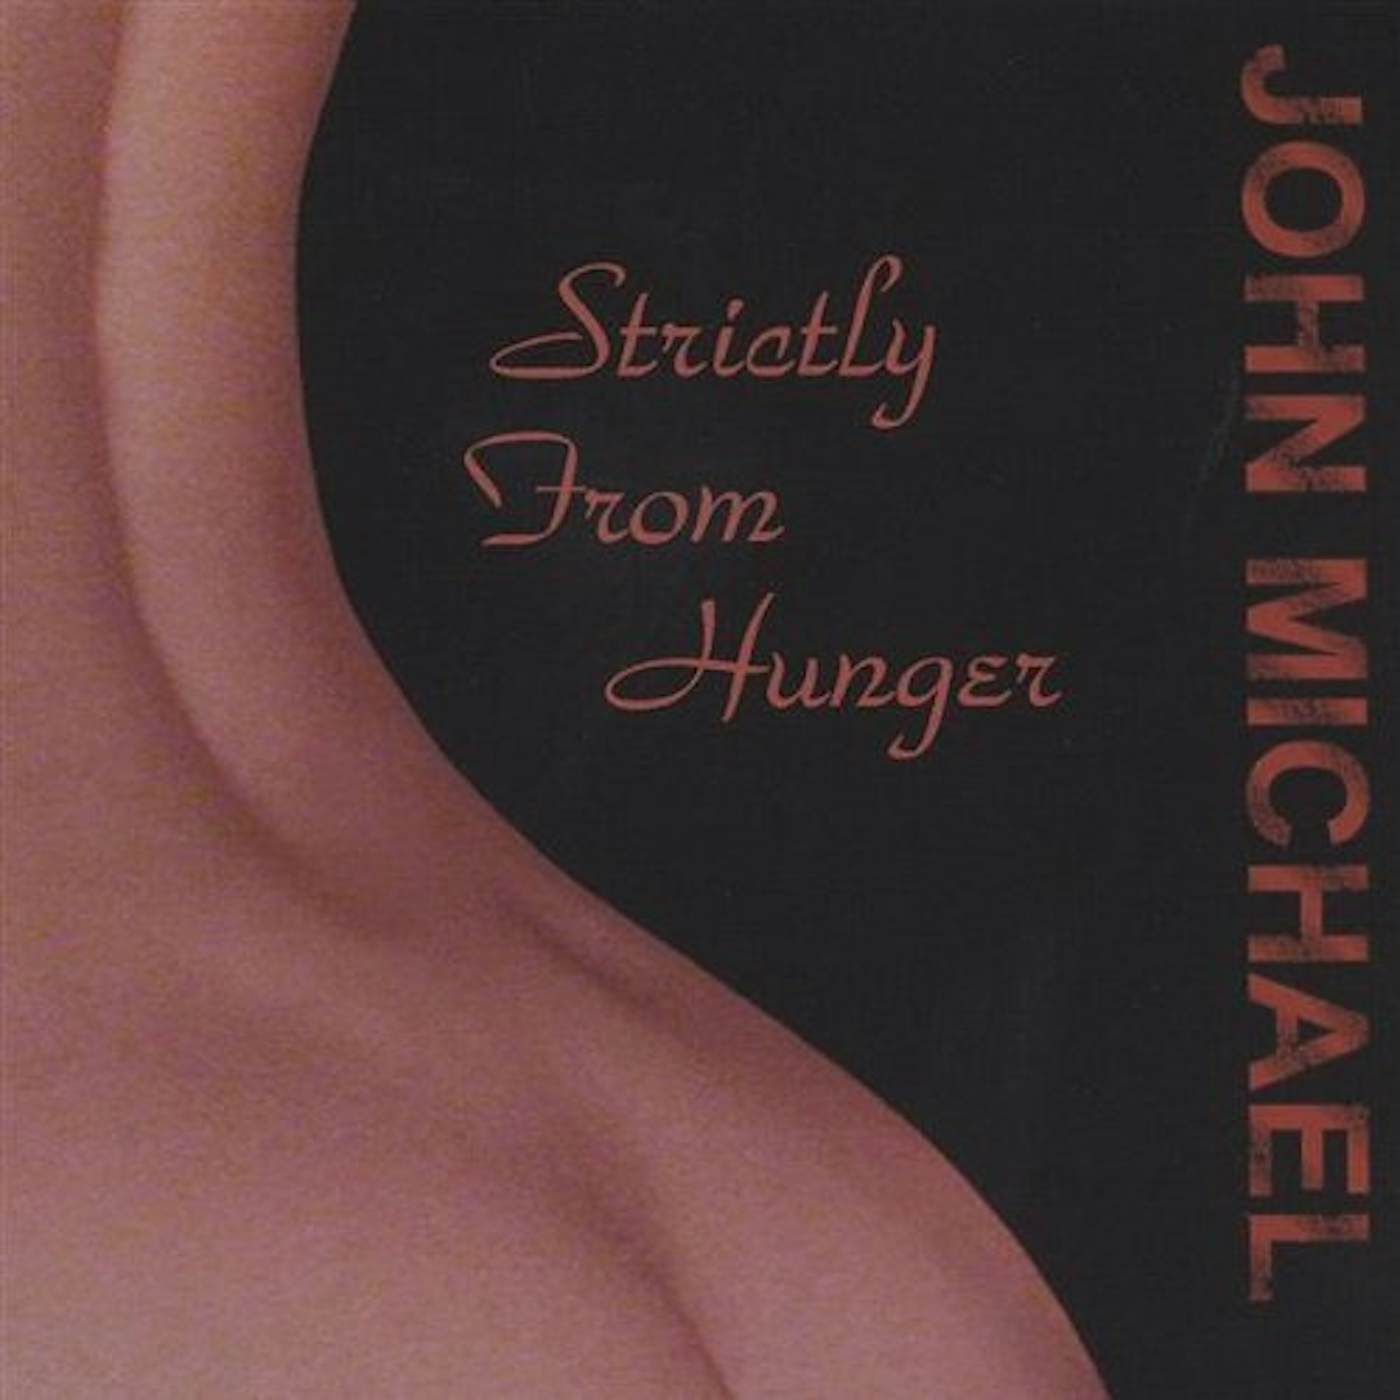 John Michael STRICTLY FROM HUNGER CD